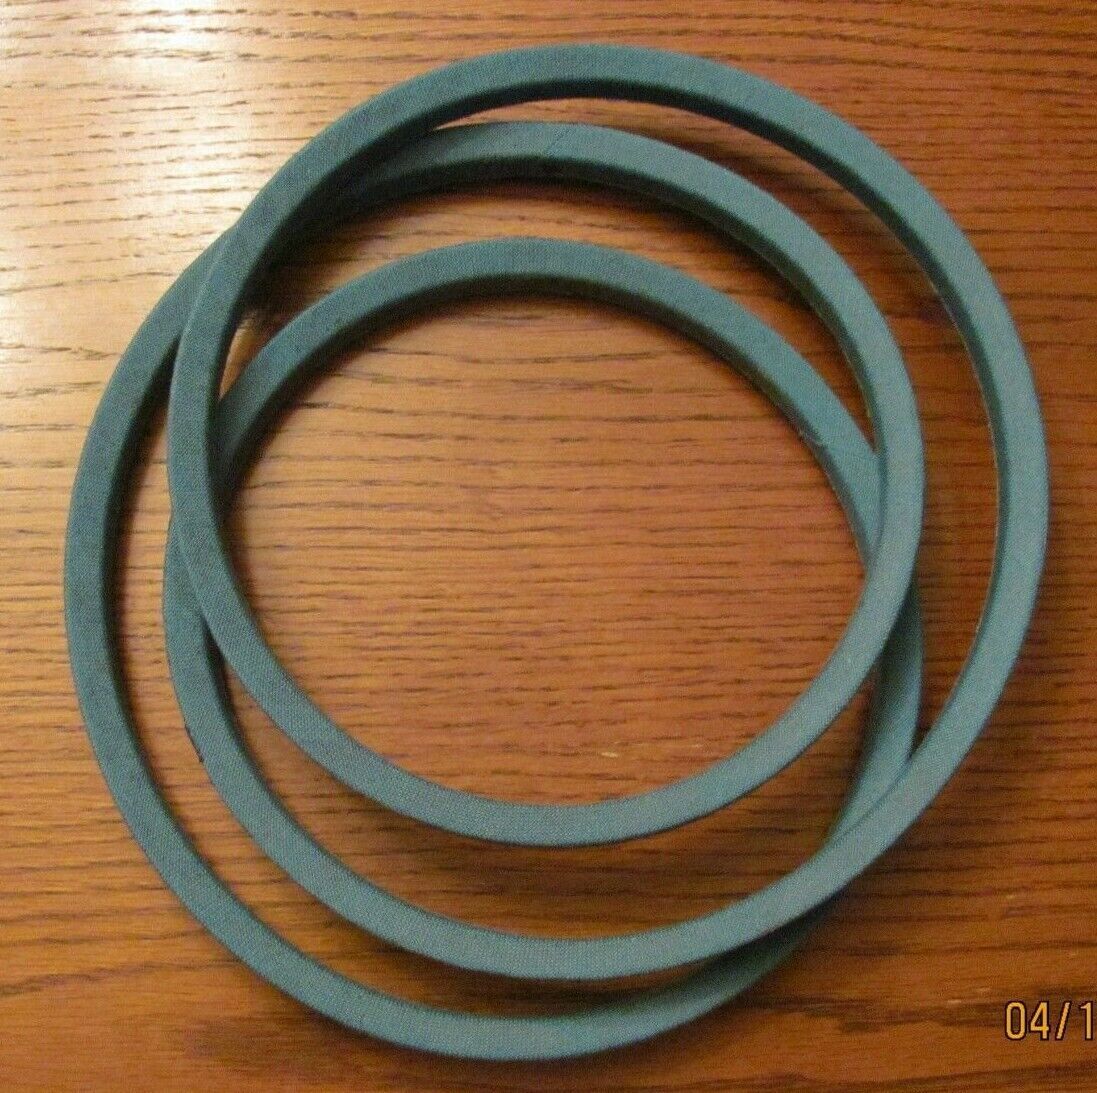 ARAMID REPLACEMENT BELT FOR KING KUTTER OR COUNTY LINE 167108 ALL 4' RFM-48